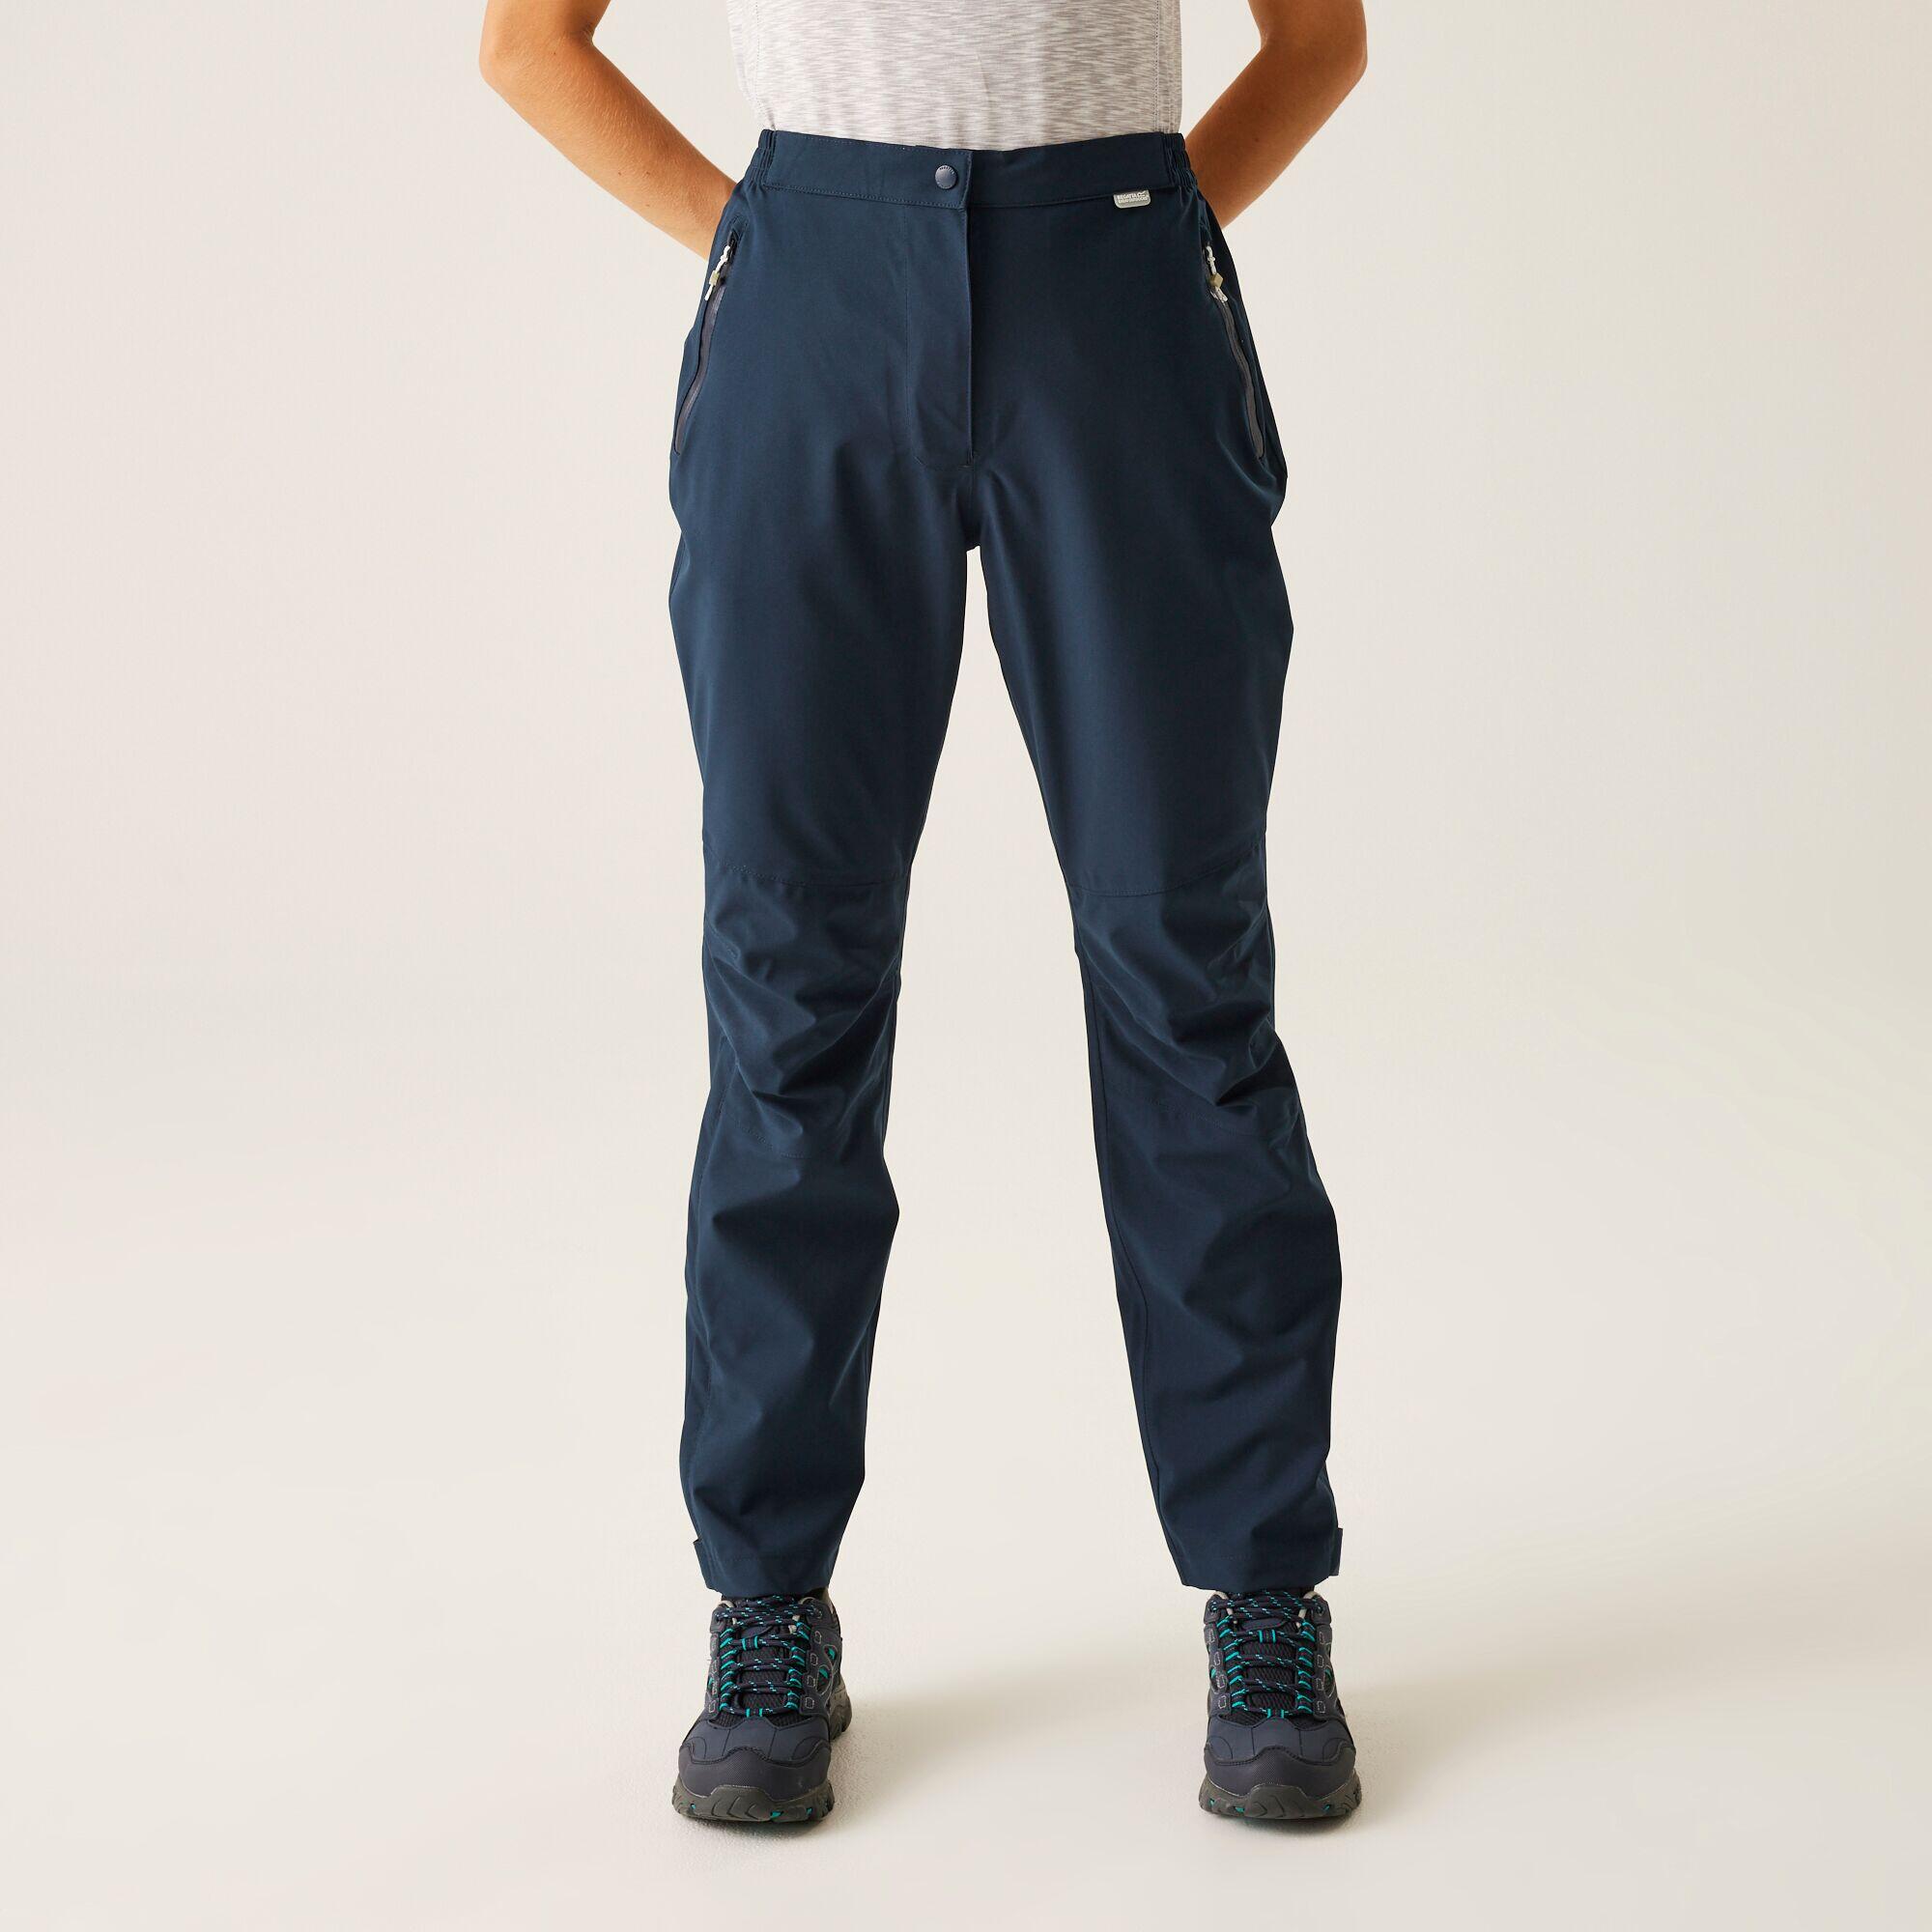 Highton Stretch Women's Hiking Overtrousers - Navy 1/5